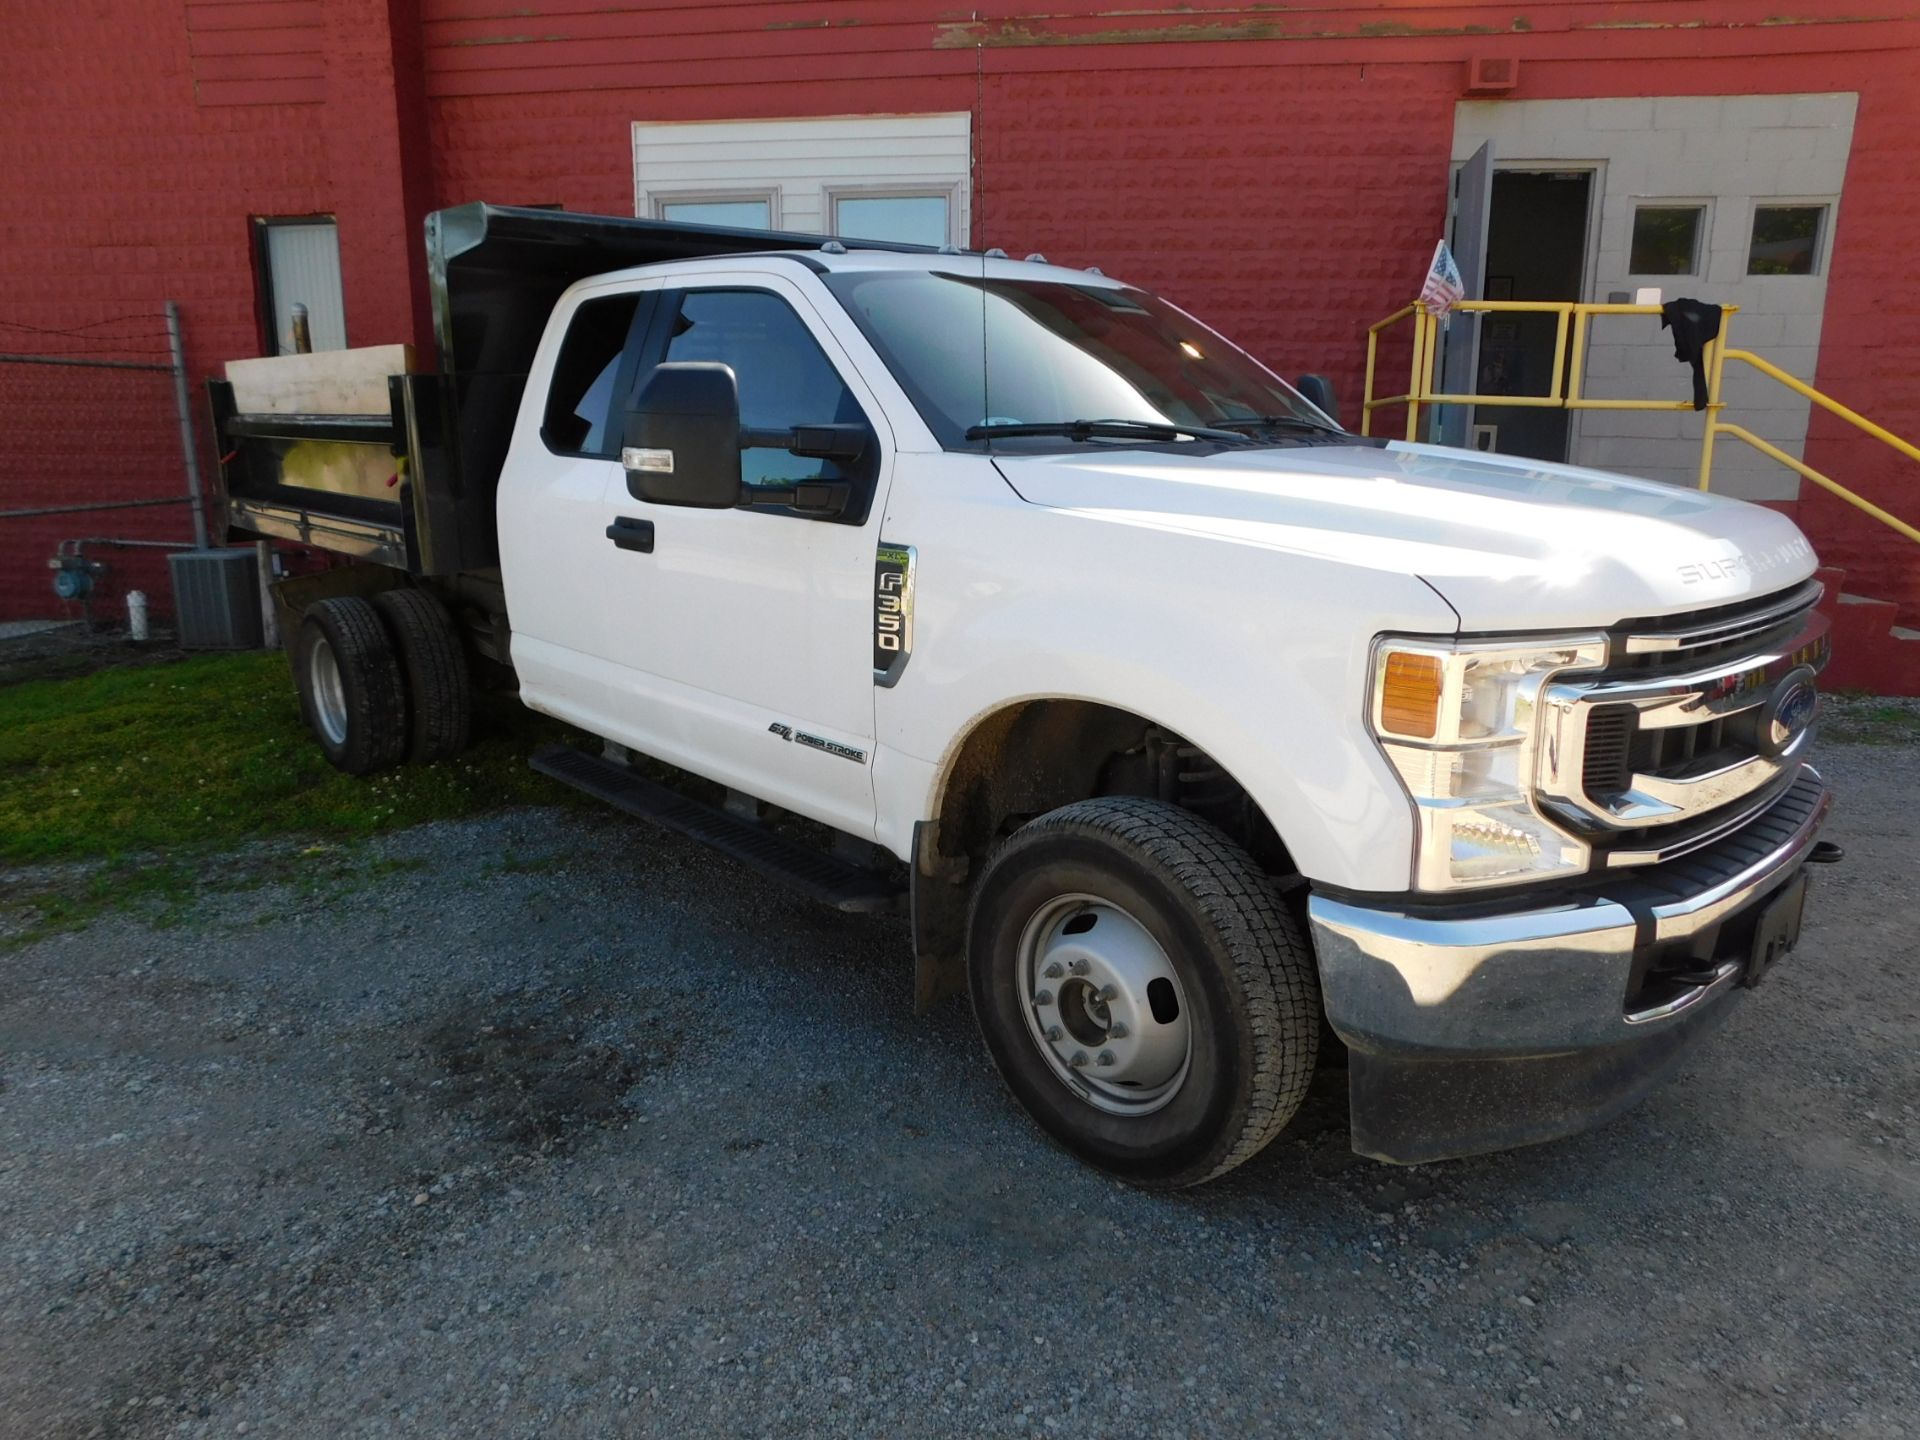 2020 Ford F-350XL Single Axle Dump Truck vin 1FD8X3HT6LEE89344, 6.7 Diesel Engine, Automatic - Image 3 of 56